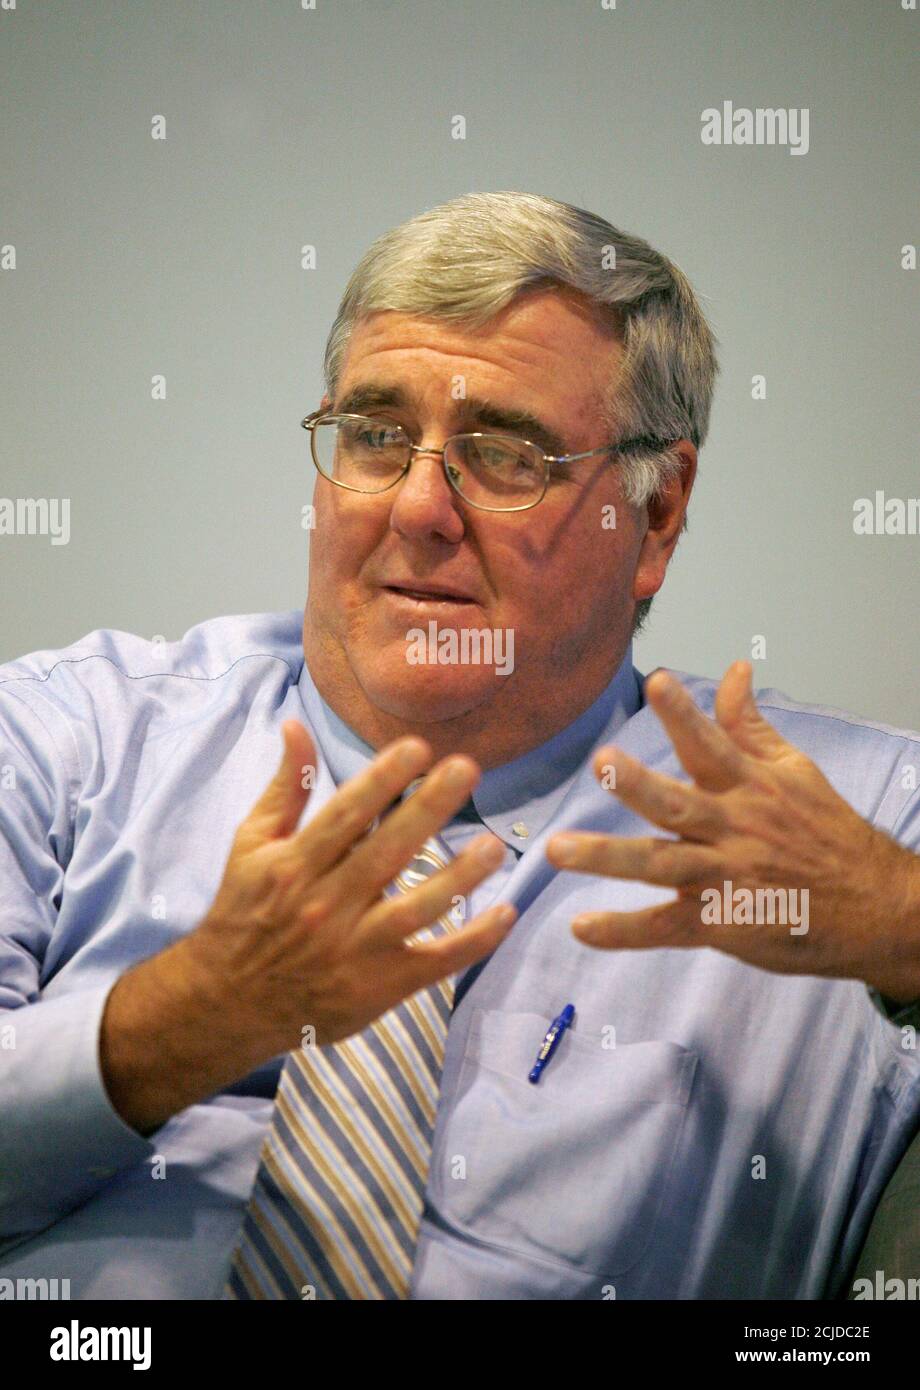 John Duffy, Chairman and CEO Keefe, Bruyette & Woods, at the Reuters Finance in New York November 5, 2007. REUTERS/Brendan (UNITED STATES Stock Photo Alamy